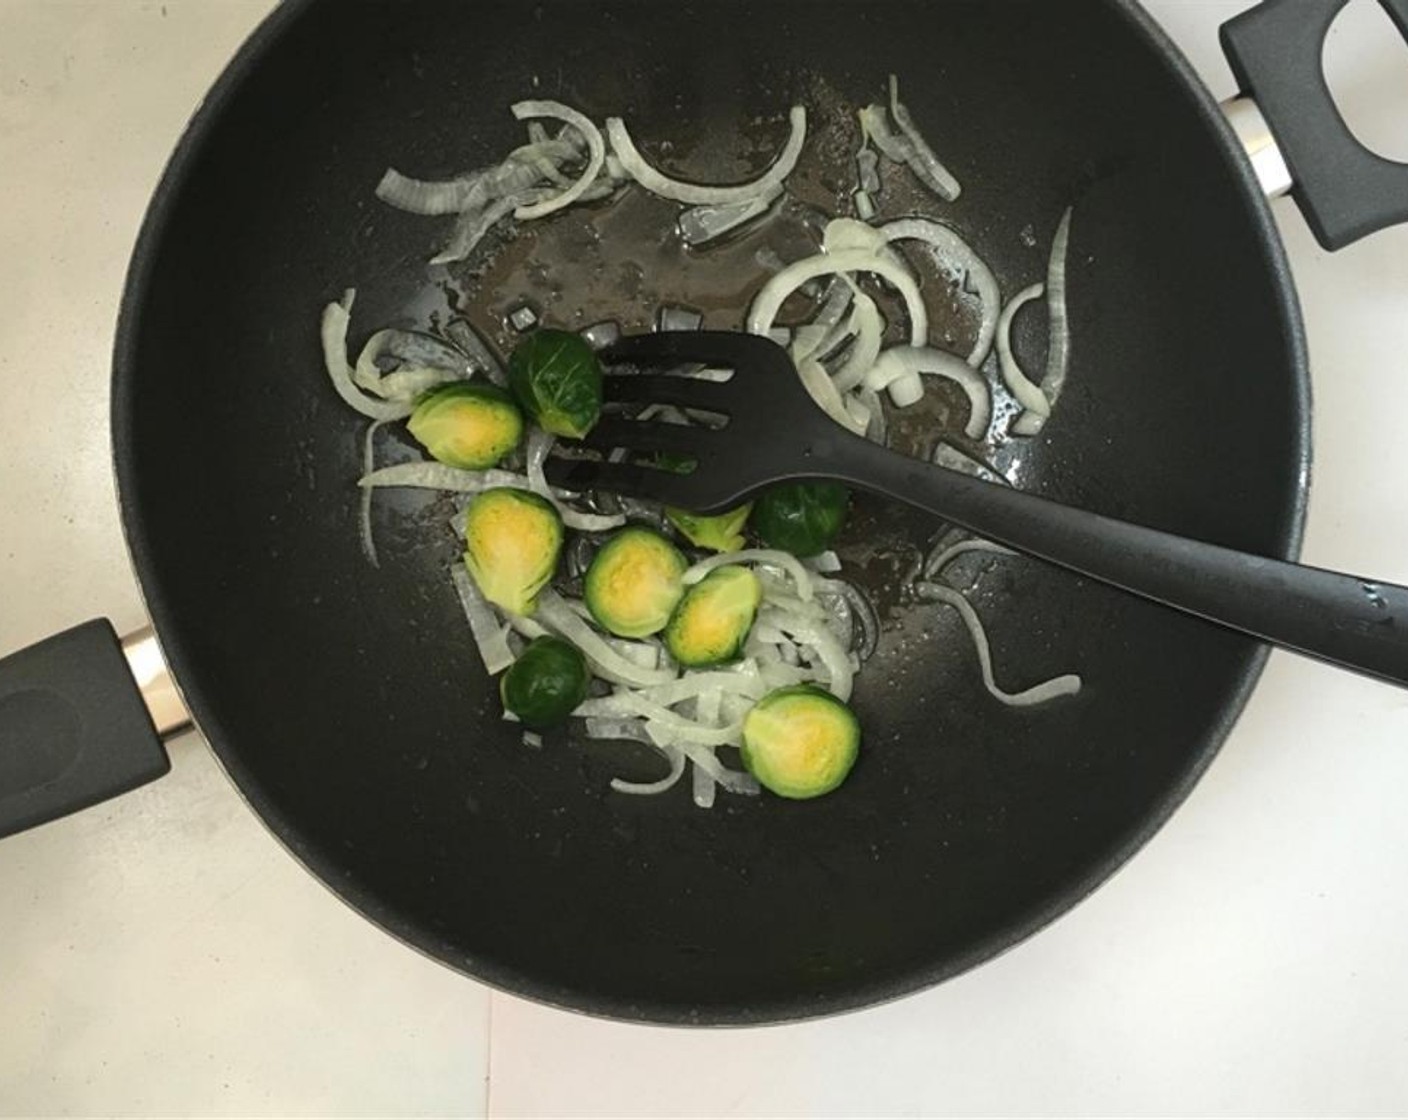 step 1 Pour the Vegetable Oil (2 Tbsp) in a large non-stick pan or wok and place it over medium-high heat. Then add the Brussels Sprouts (6) together with the Garlic (1 clove) and Onion (1/2). Gently fry the vegetables for 4 minutes.